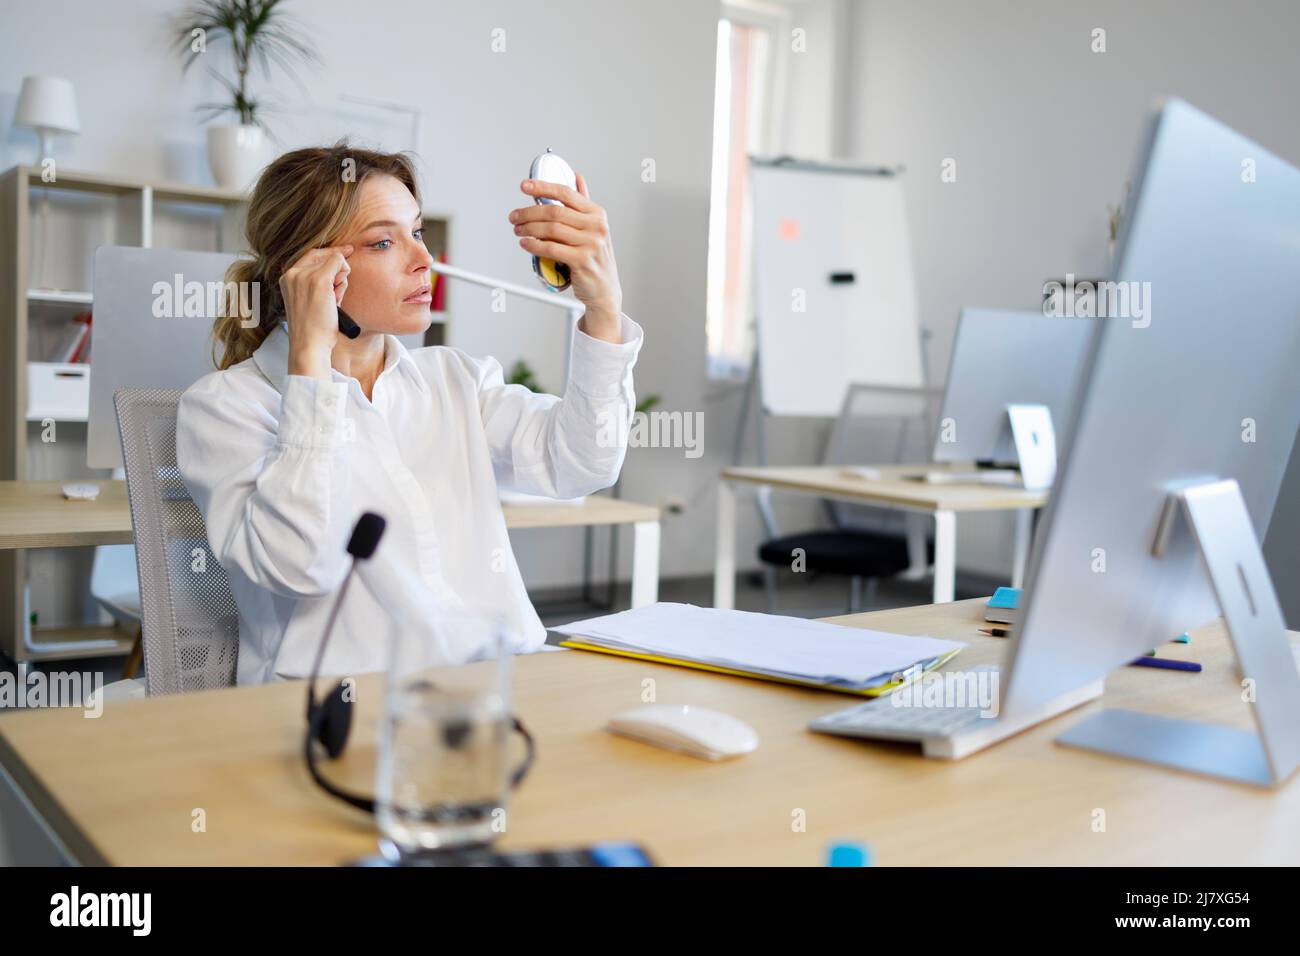 Elegant office woman sits at her workplace and looks in the mirror to touch up her makeup Stock Photo